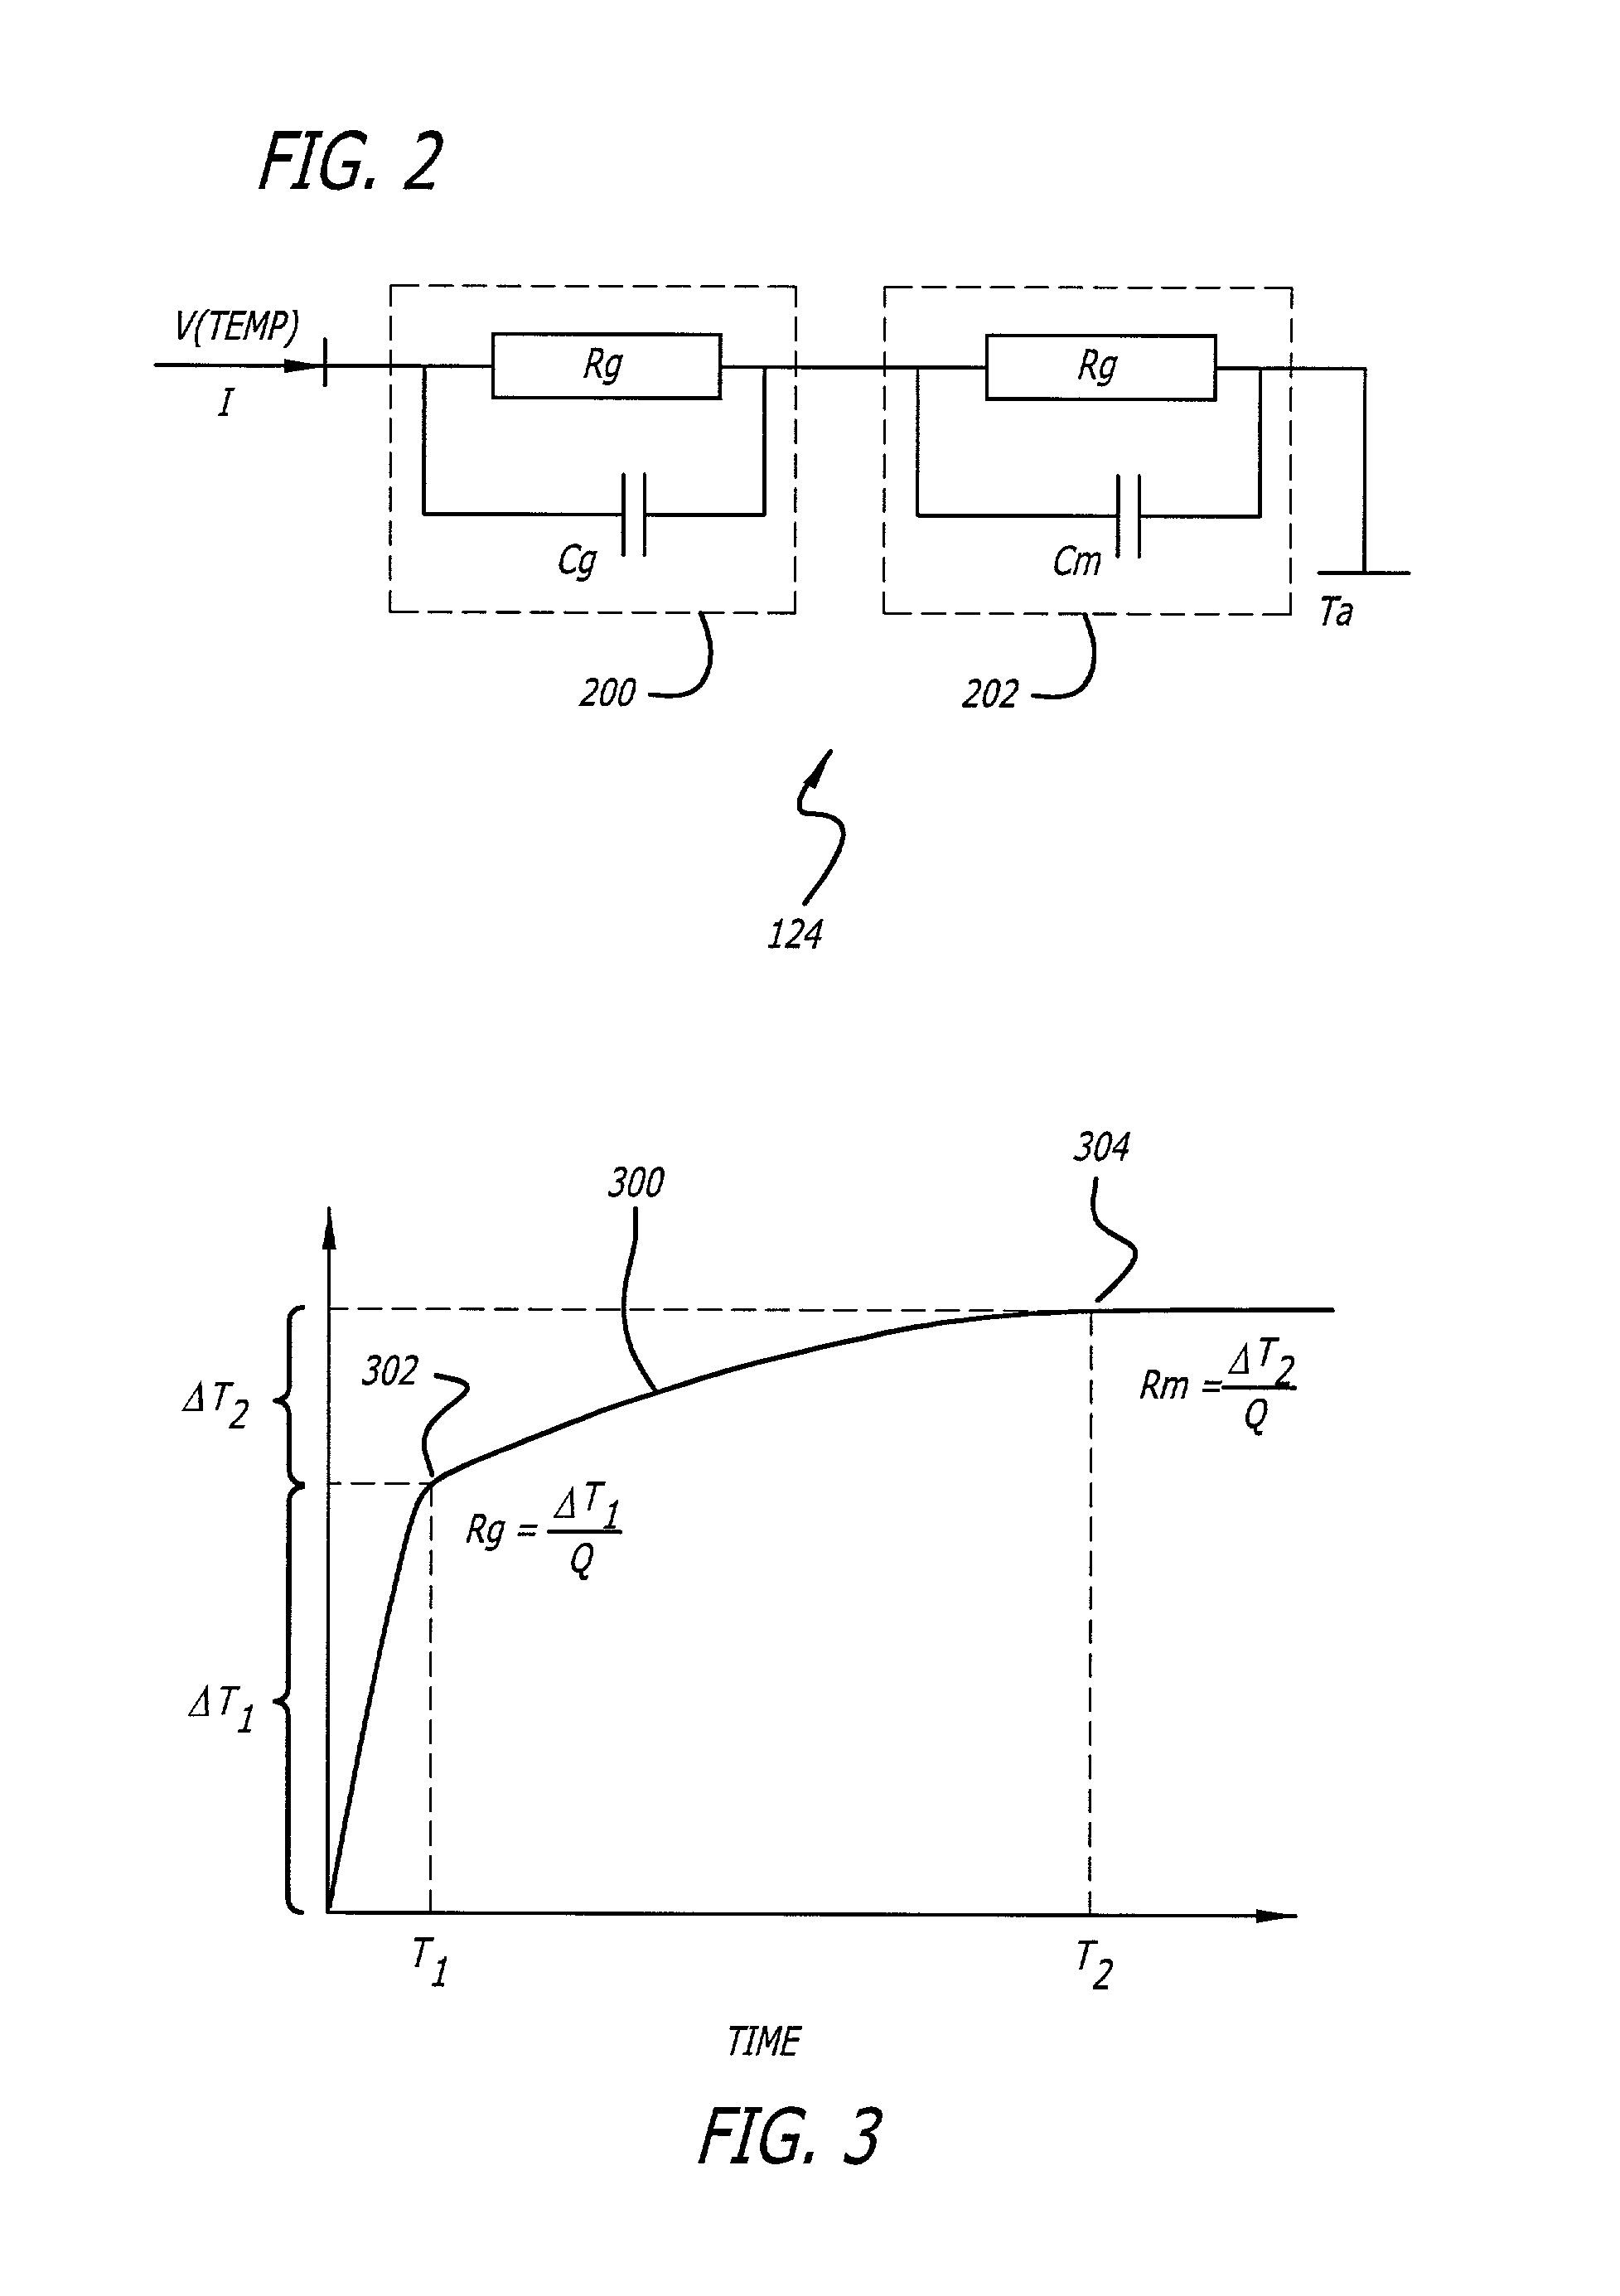 System for using digital signal processing to compensate for power compression of loudspeakers